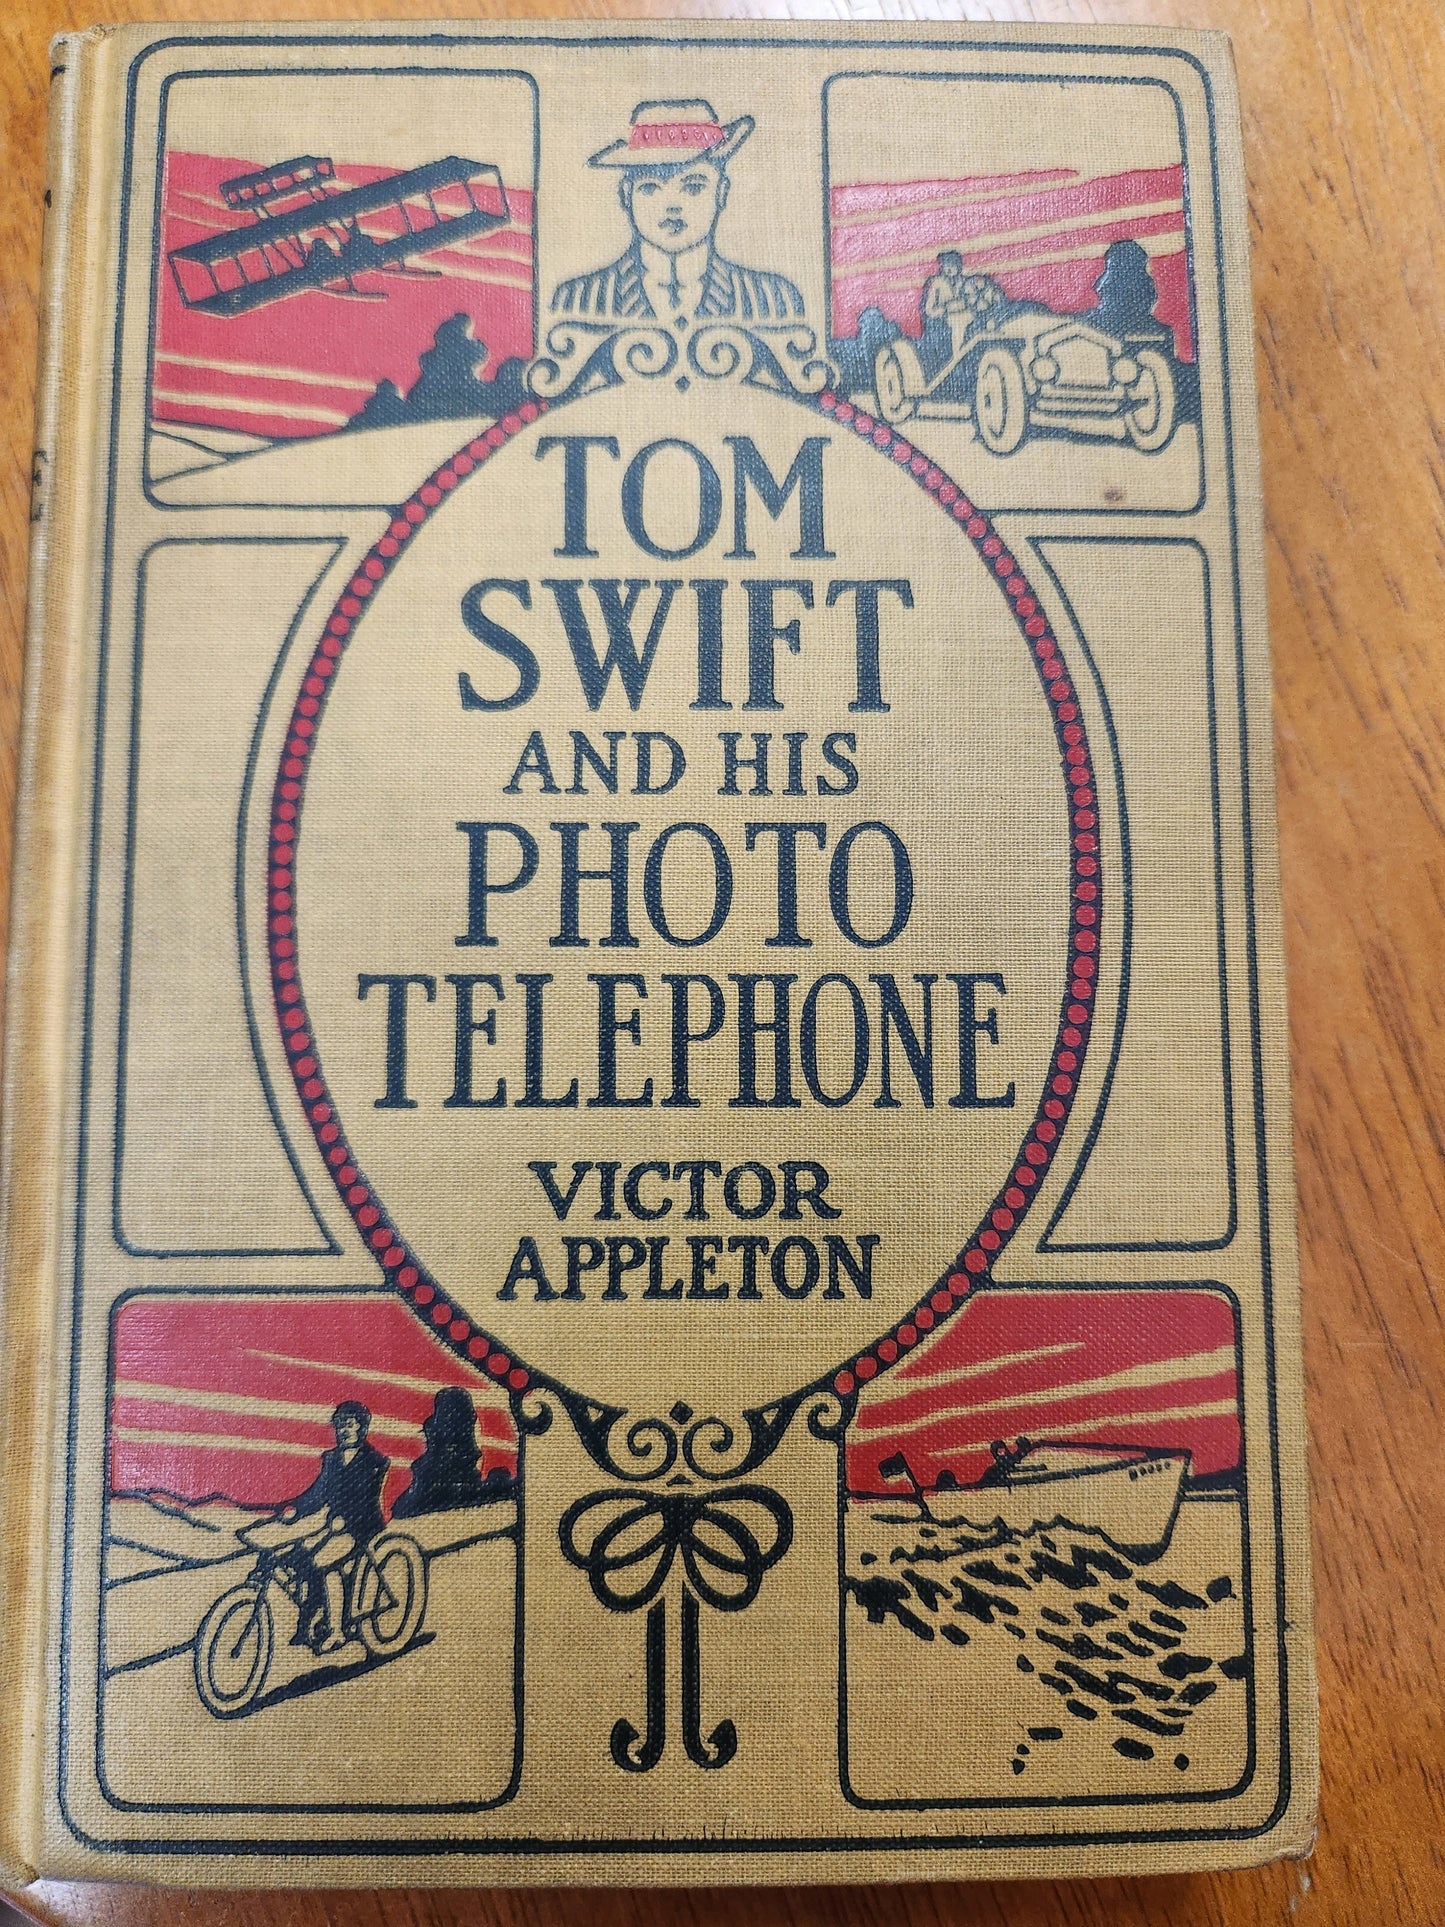 Victor Appleton - Tom Swift and his Photo Telephone - Dead Tree Dreams Bookstore